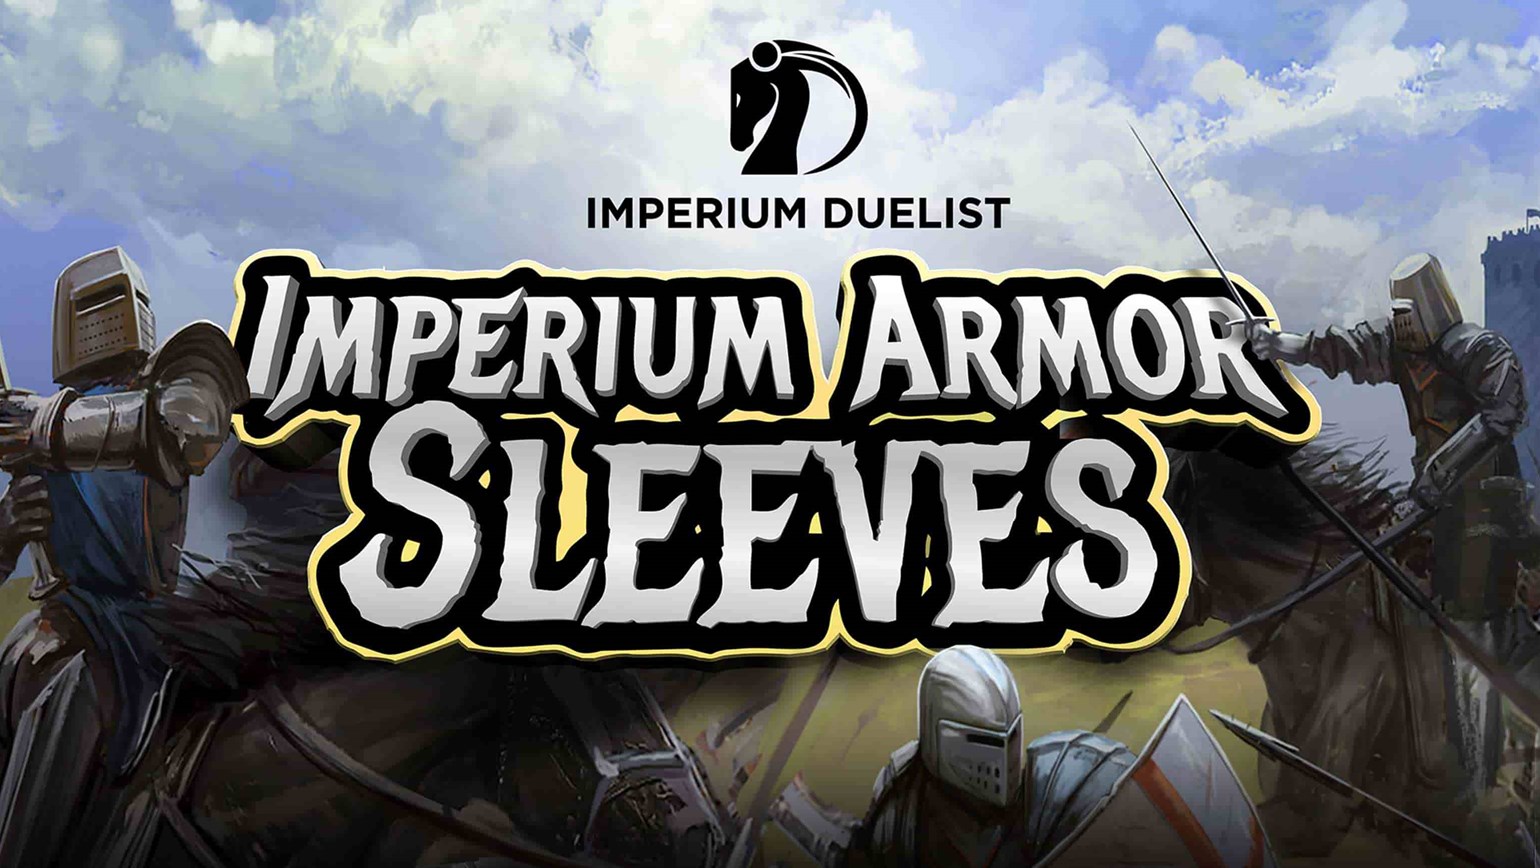 Imperium Armor Sleeves Added to TCGplayer Catalog